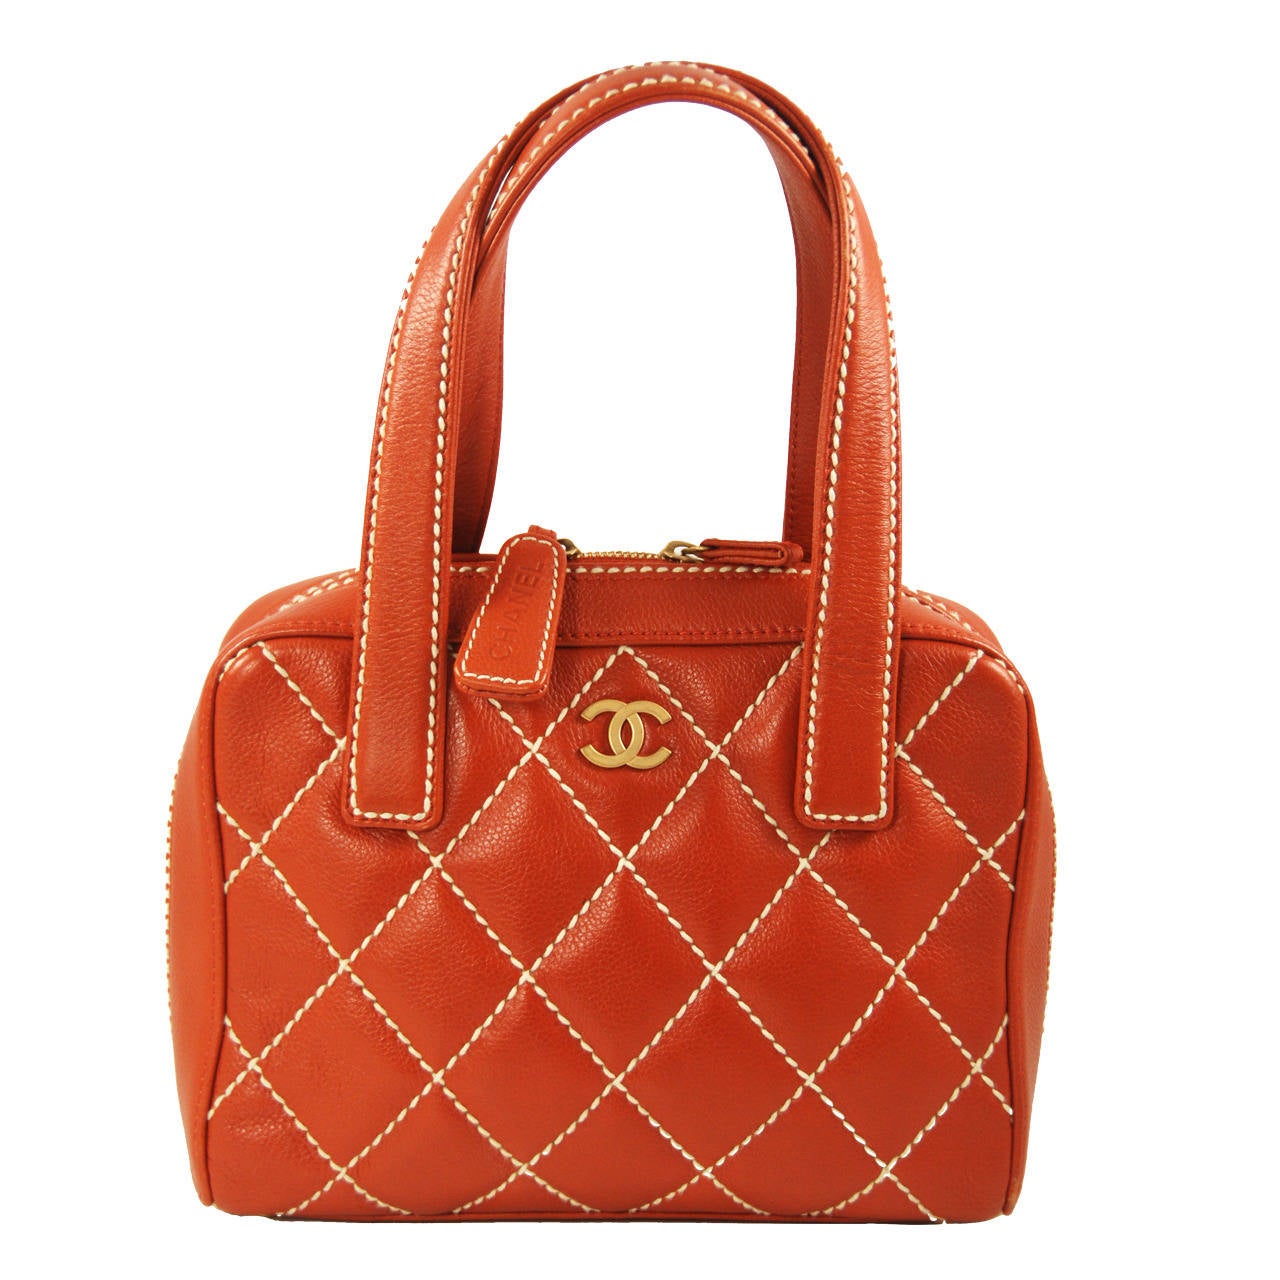 Chanel Dark Tan Caviar Leather Quilted Top Handle Handbag For Sale